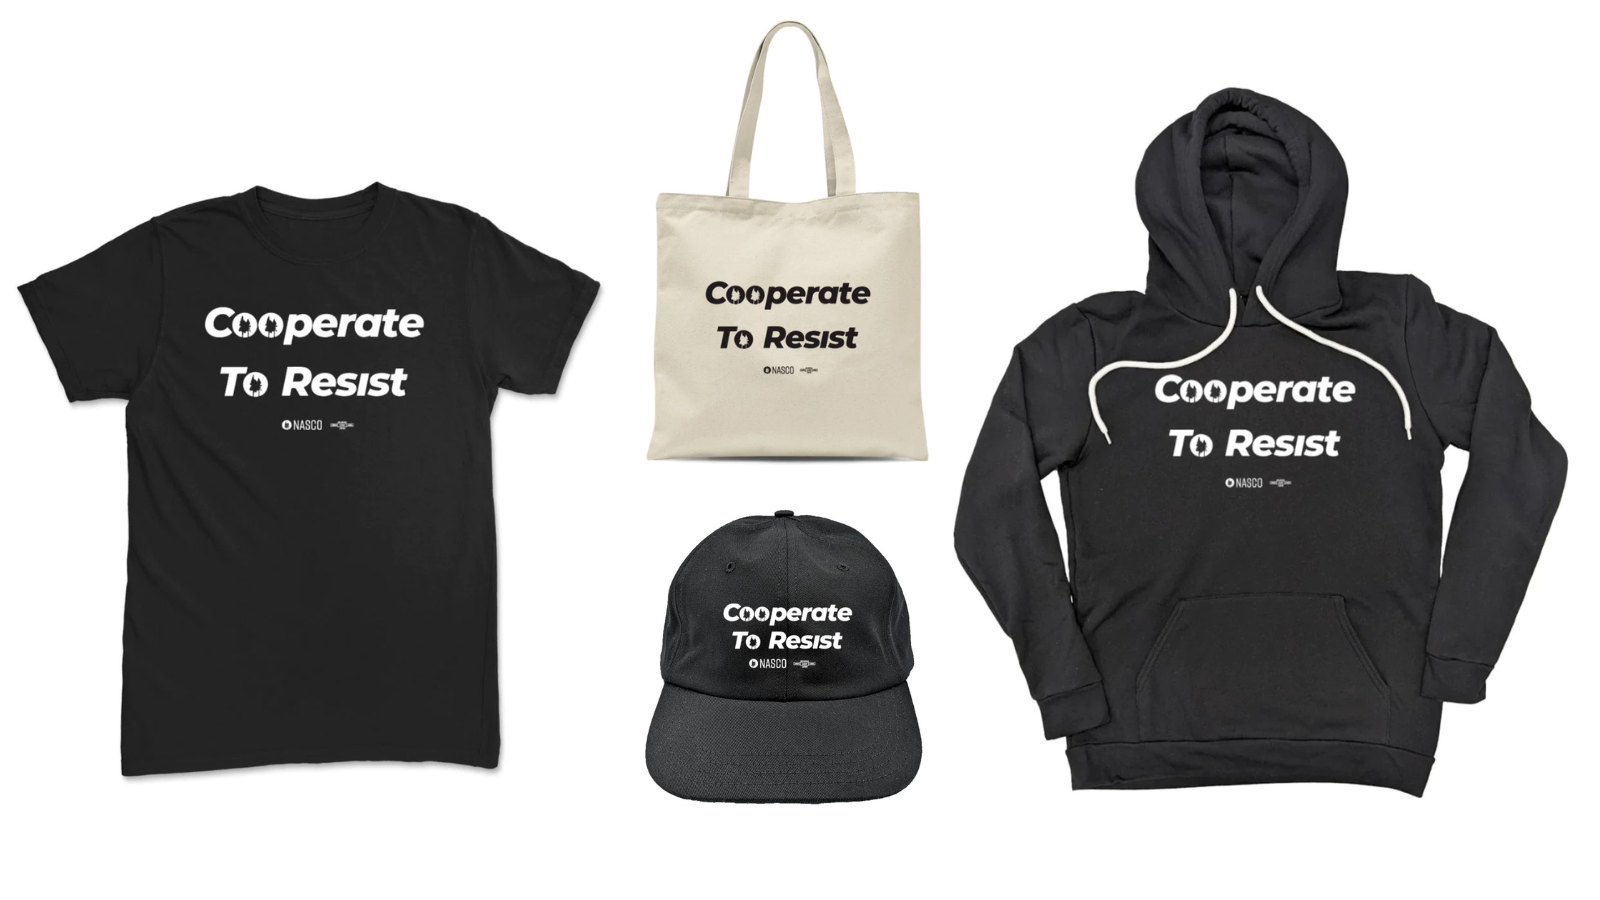  Image: nasco merch pictured including a black t-shirt, white tote bag, black baseball cap, and black hooded sweatshirt. All merch says Cooperate to Resist followed by the NASCO logo  and the union co-op logo